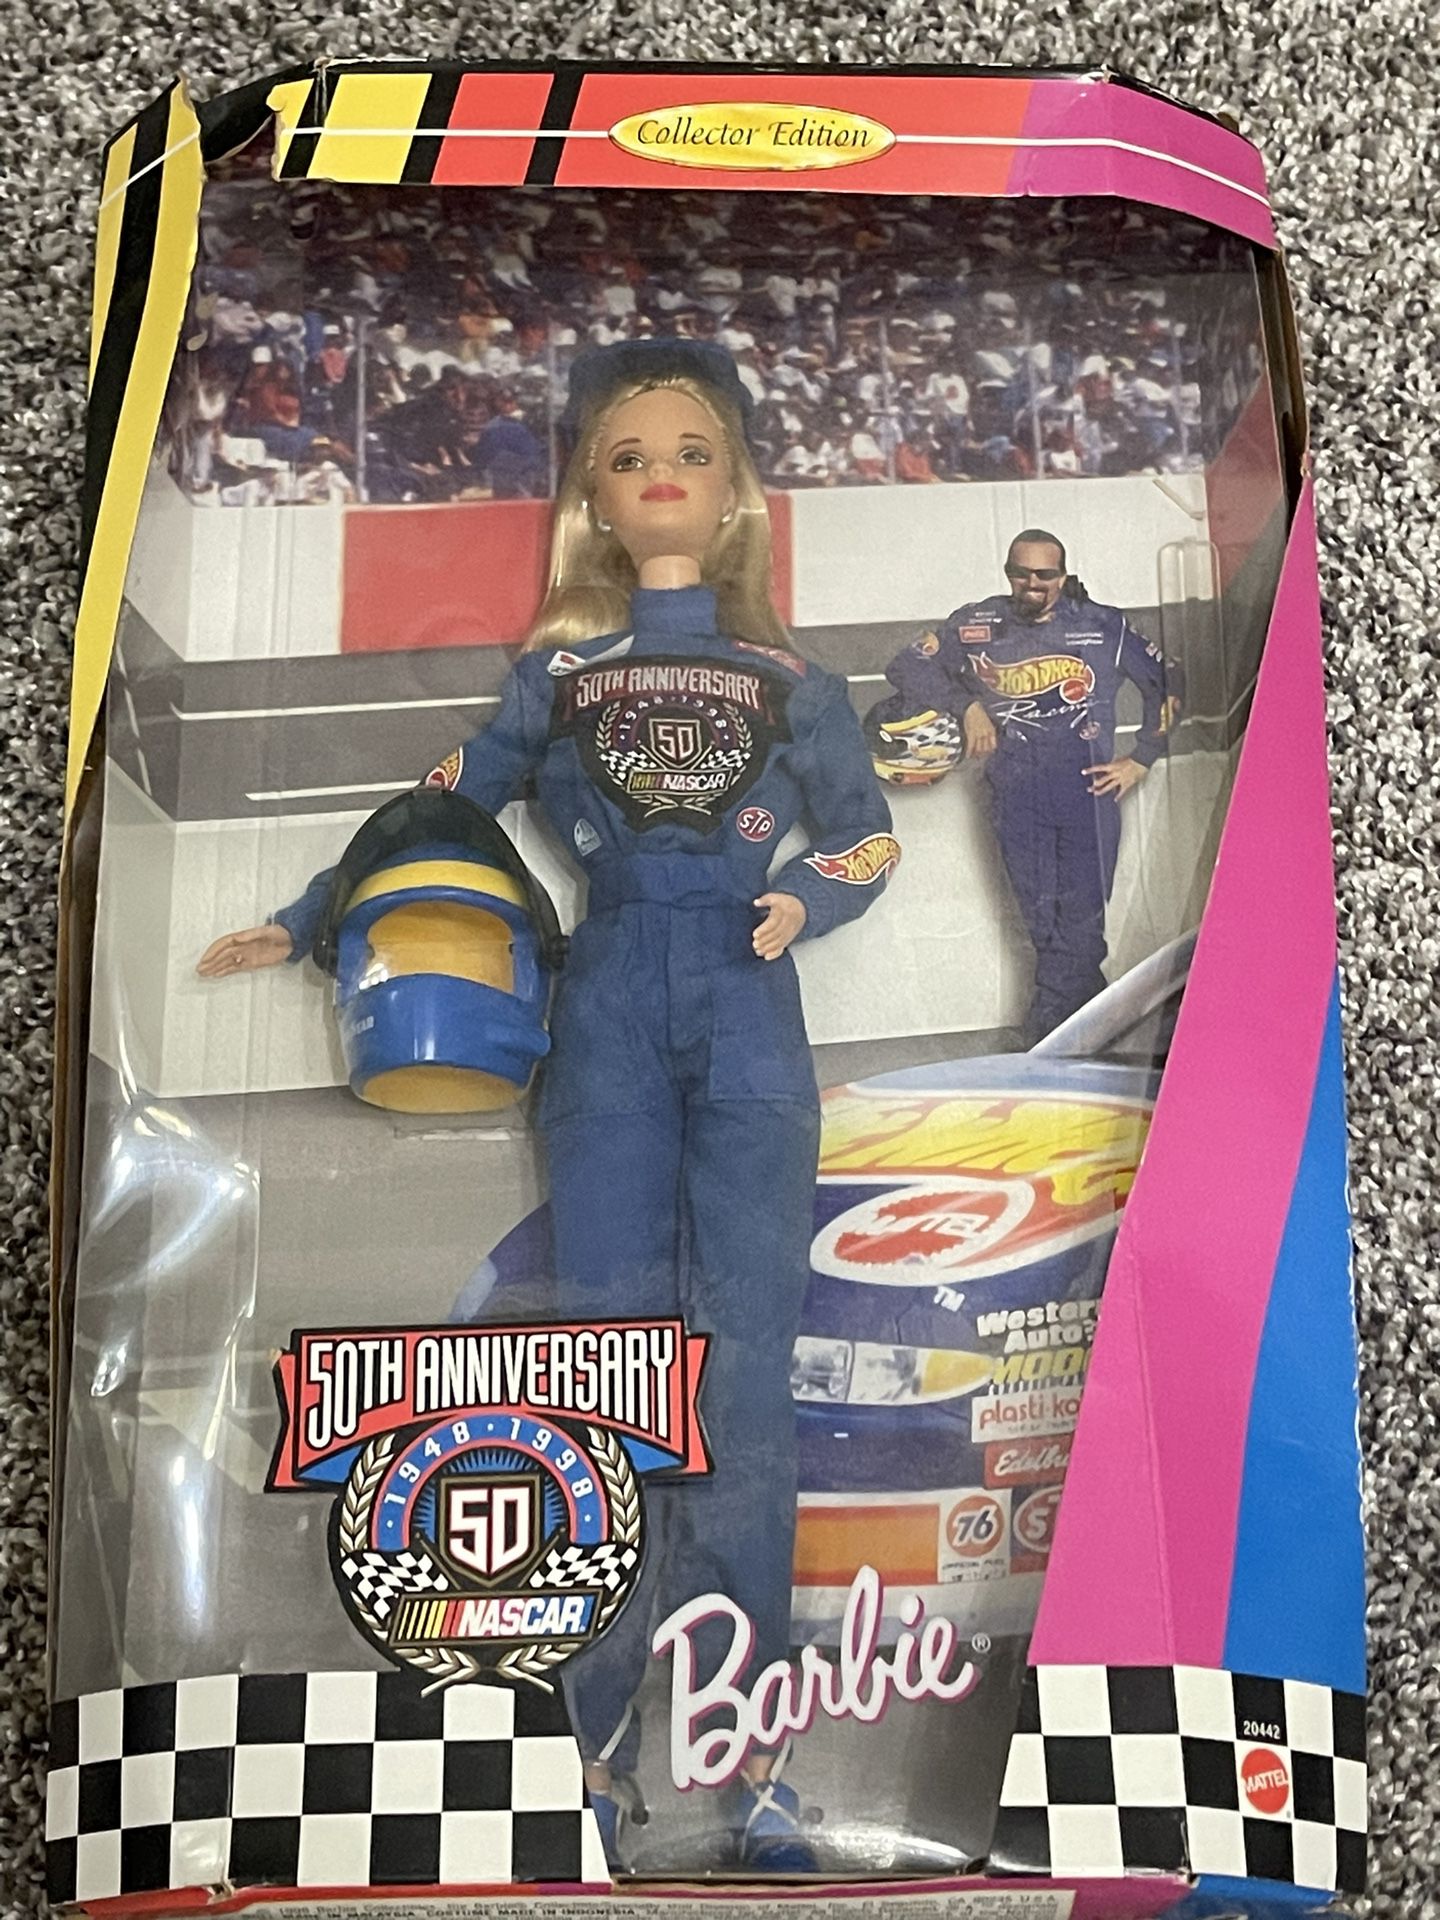 NASCAR 50th Anniversary Barbie-New in Box- Please see pics for box damage